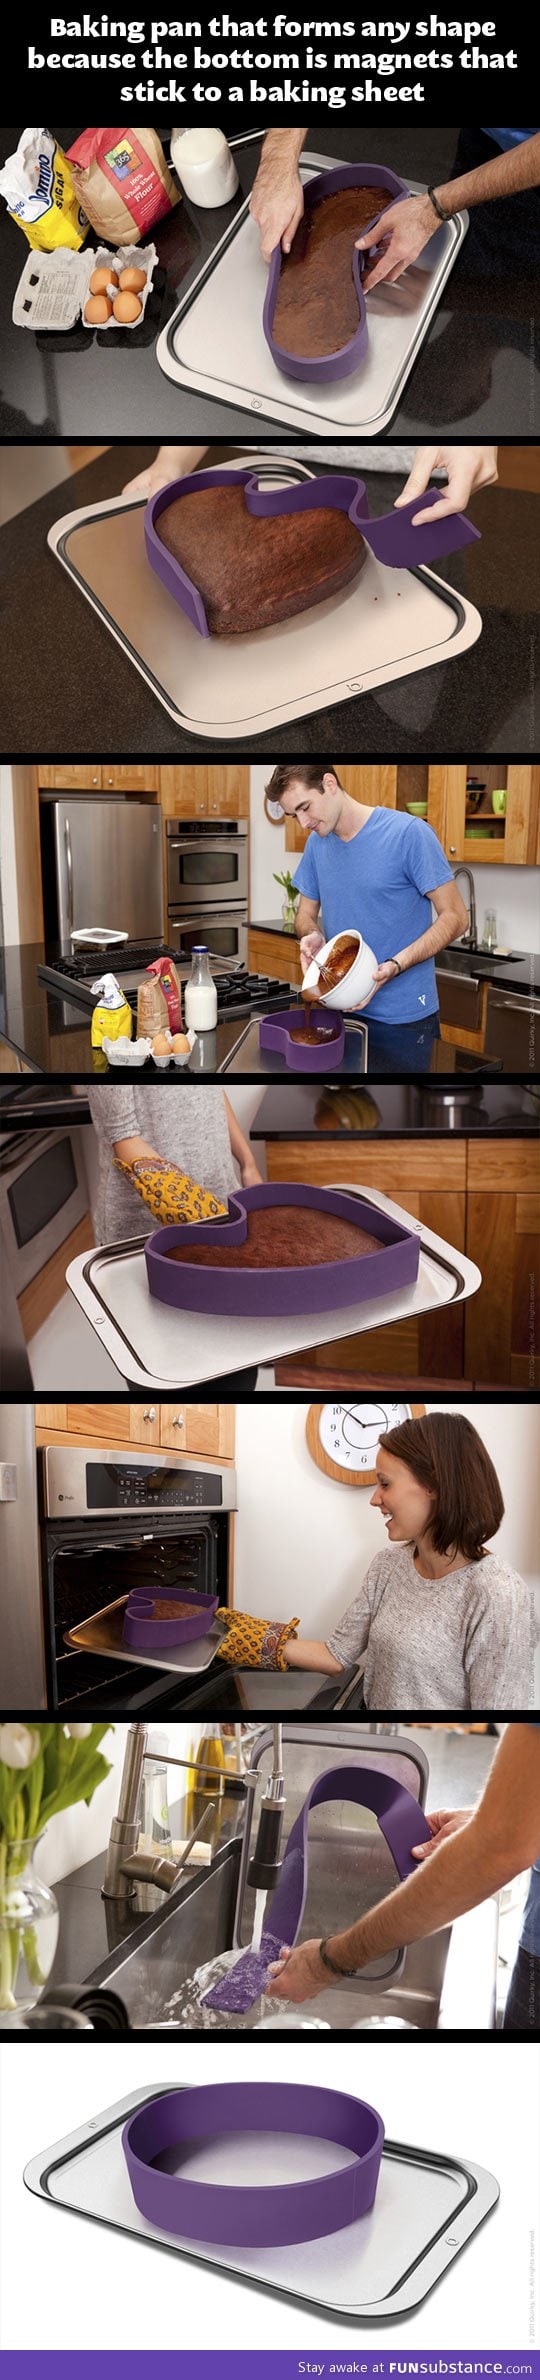 A baking pan with any shape